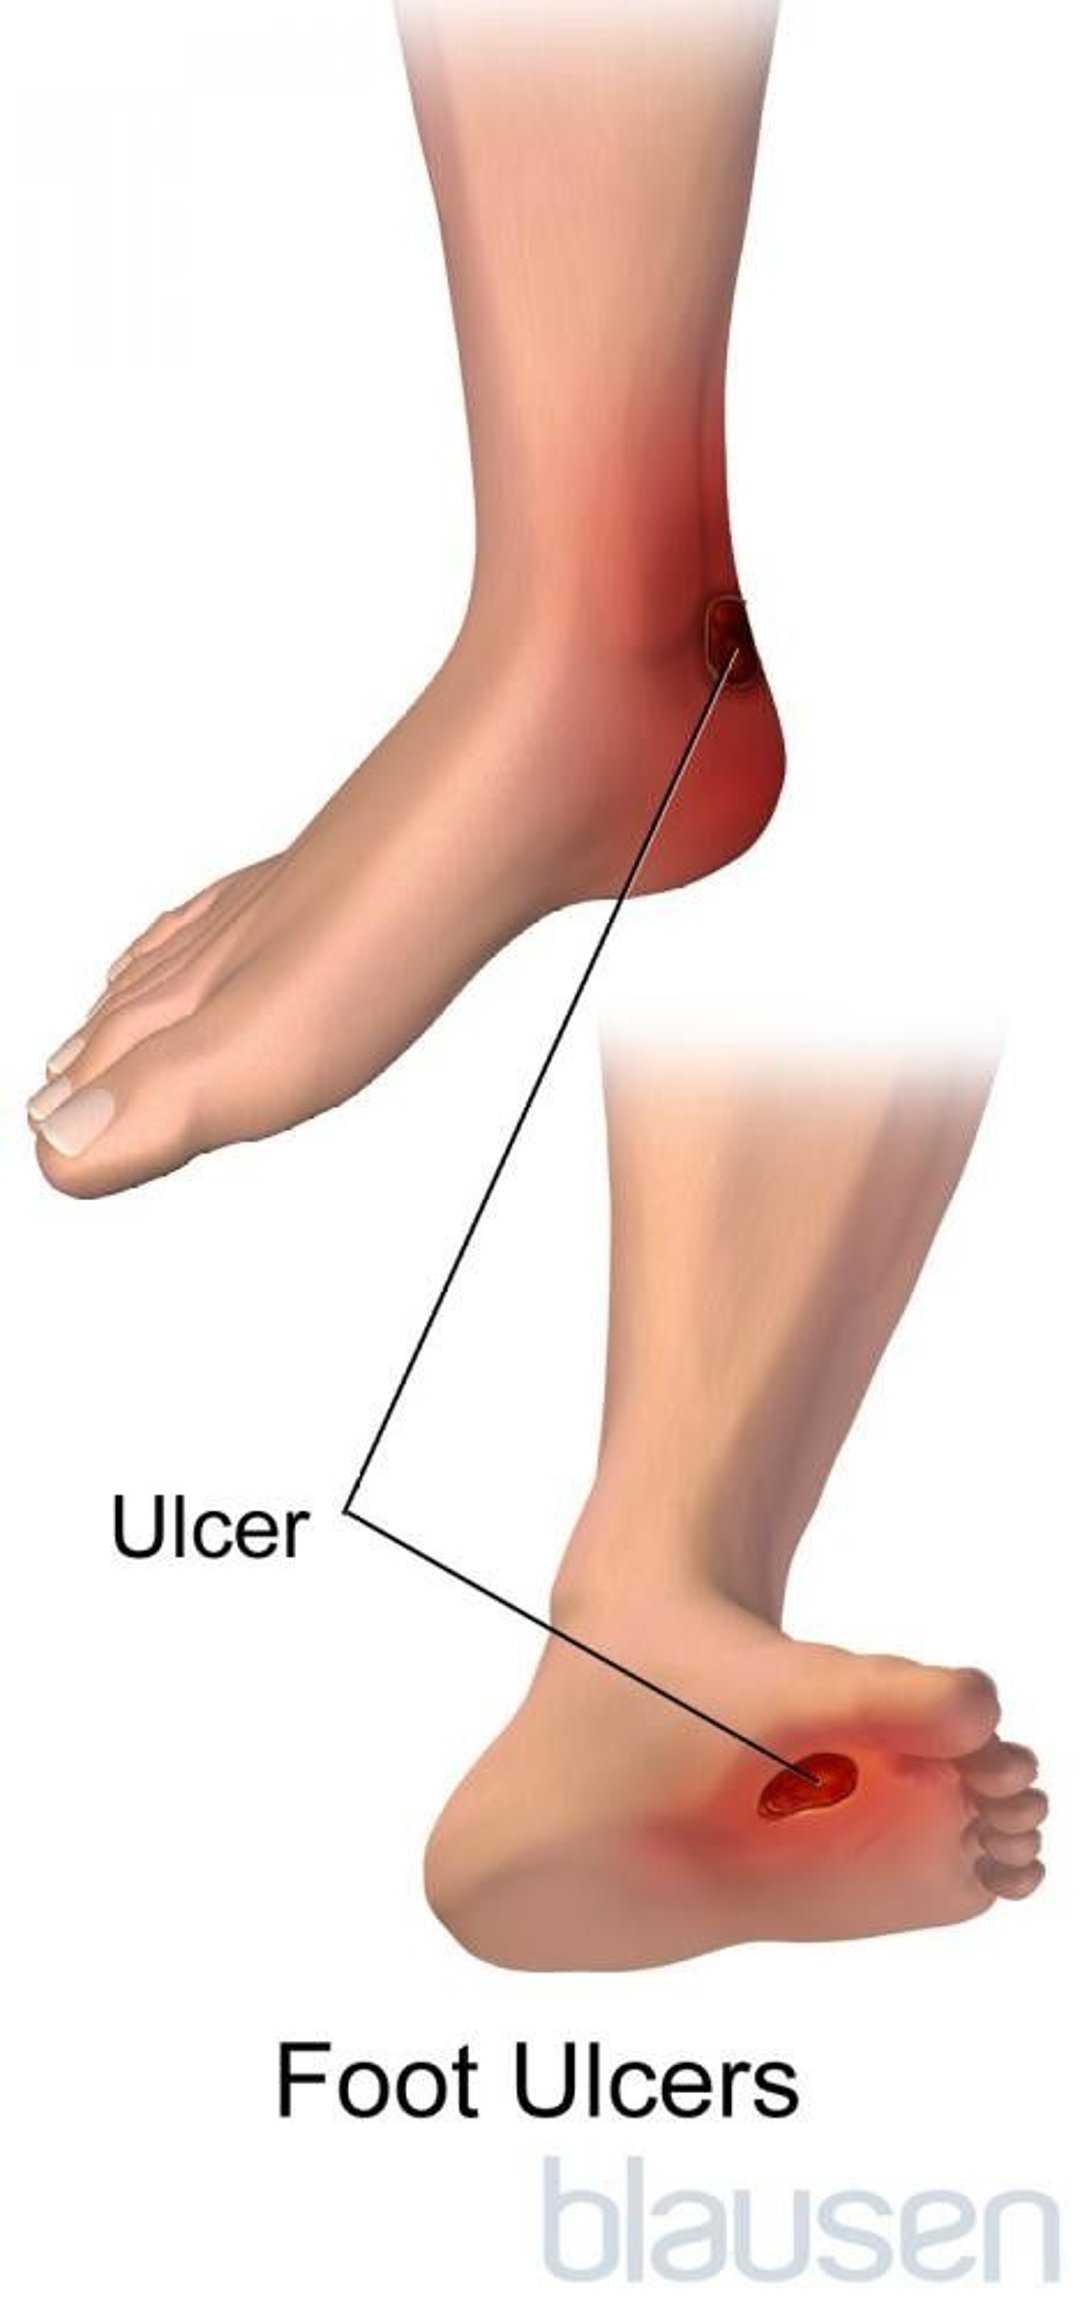 Foot Ulcers Resulting From Diabetes